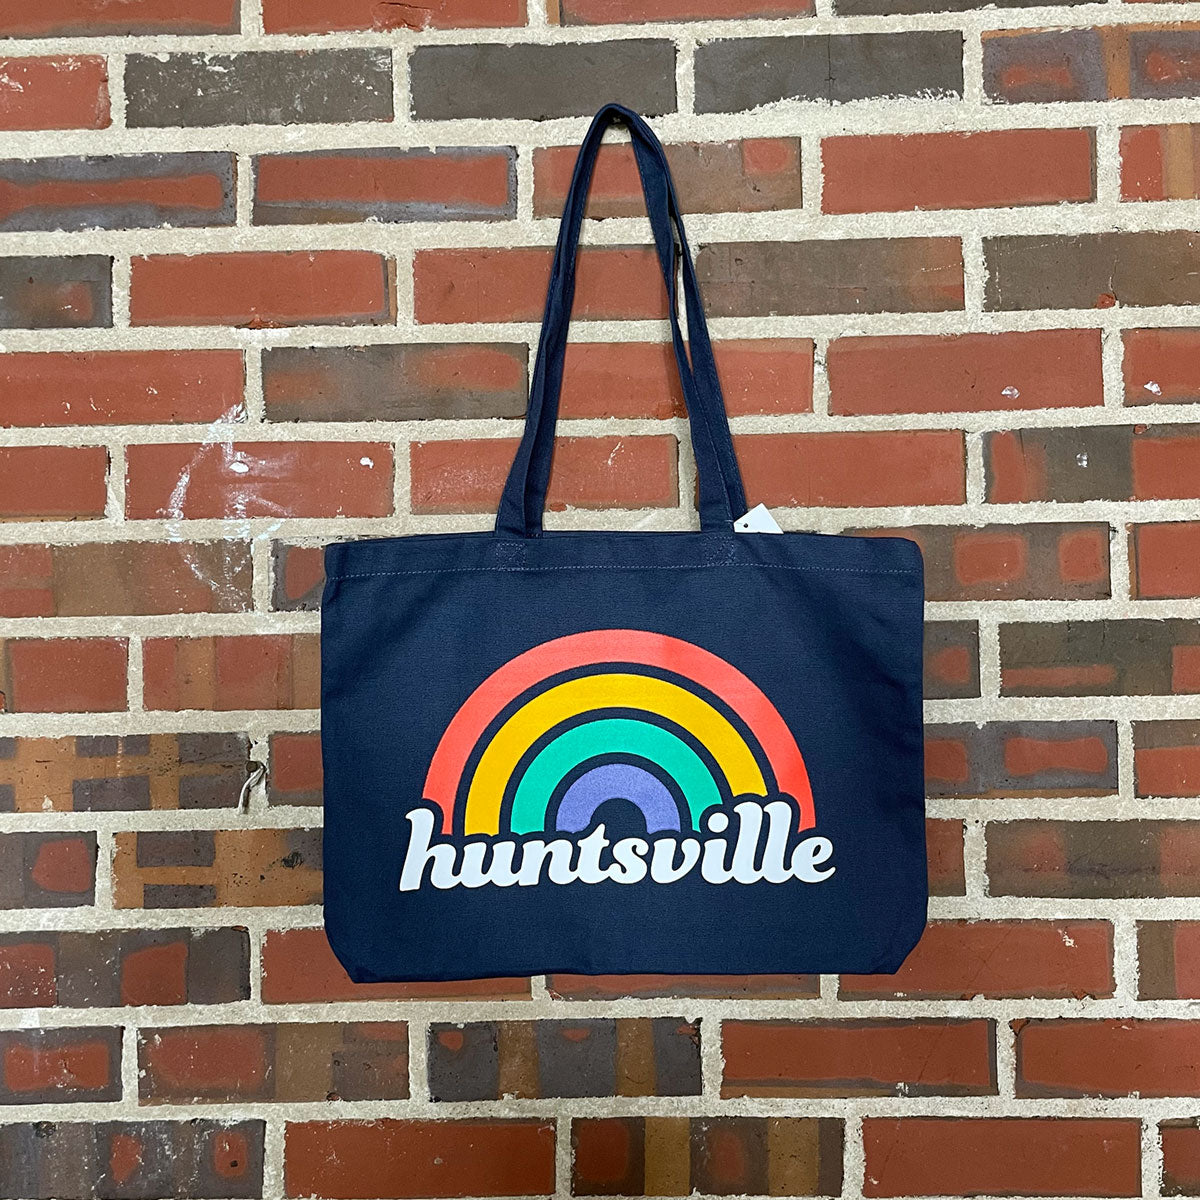 Dark blue tote bag of the text "huntsville" with a rainbow over it